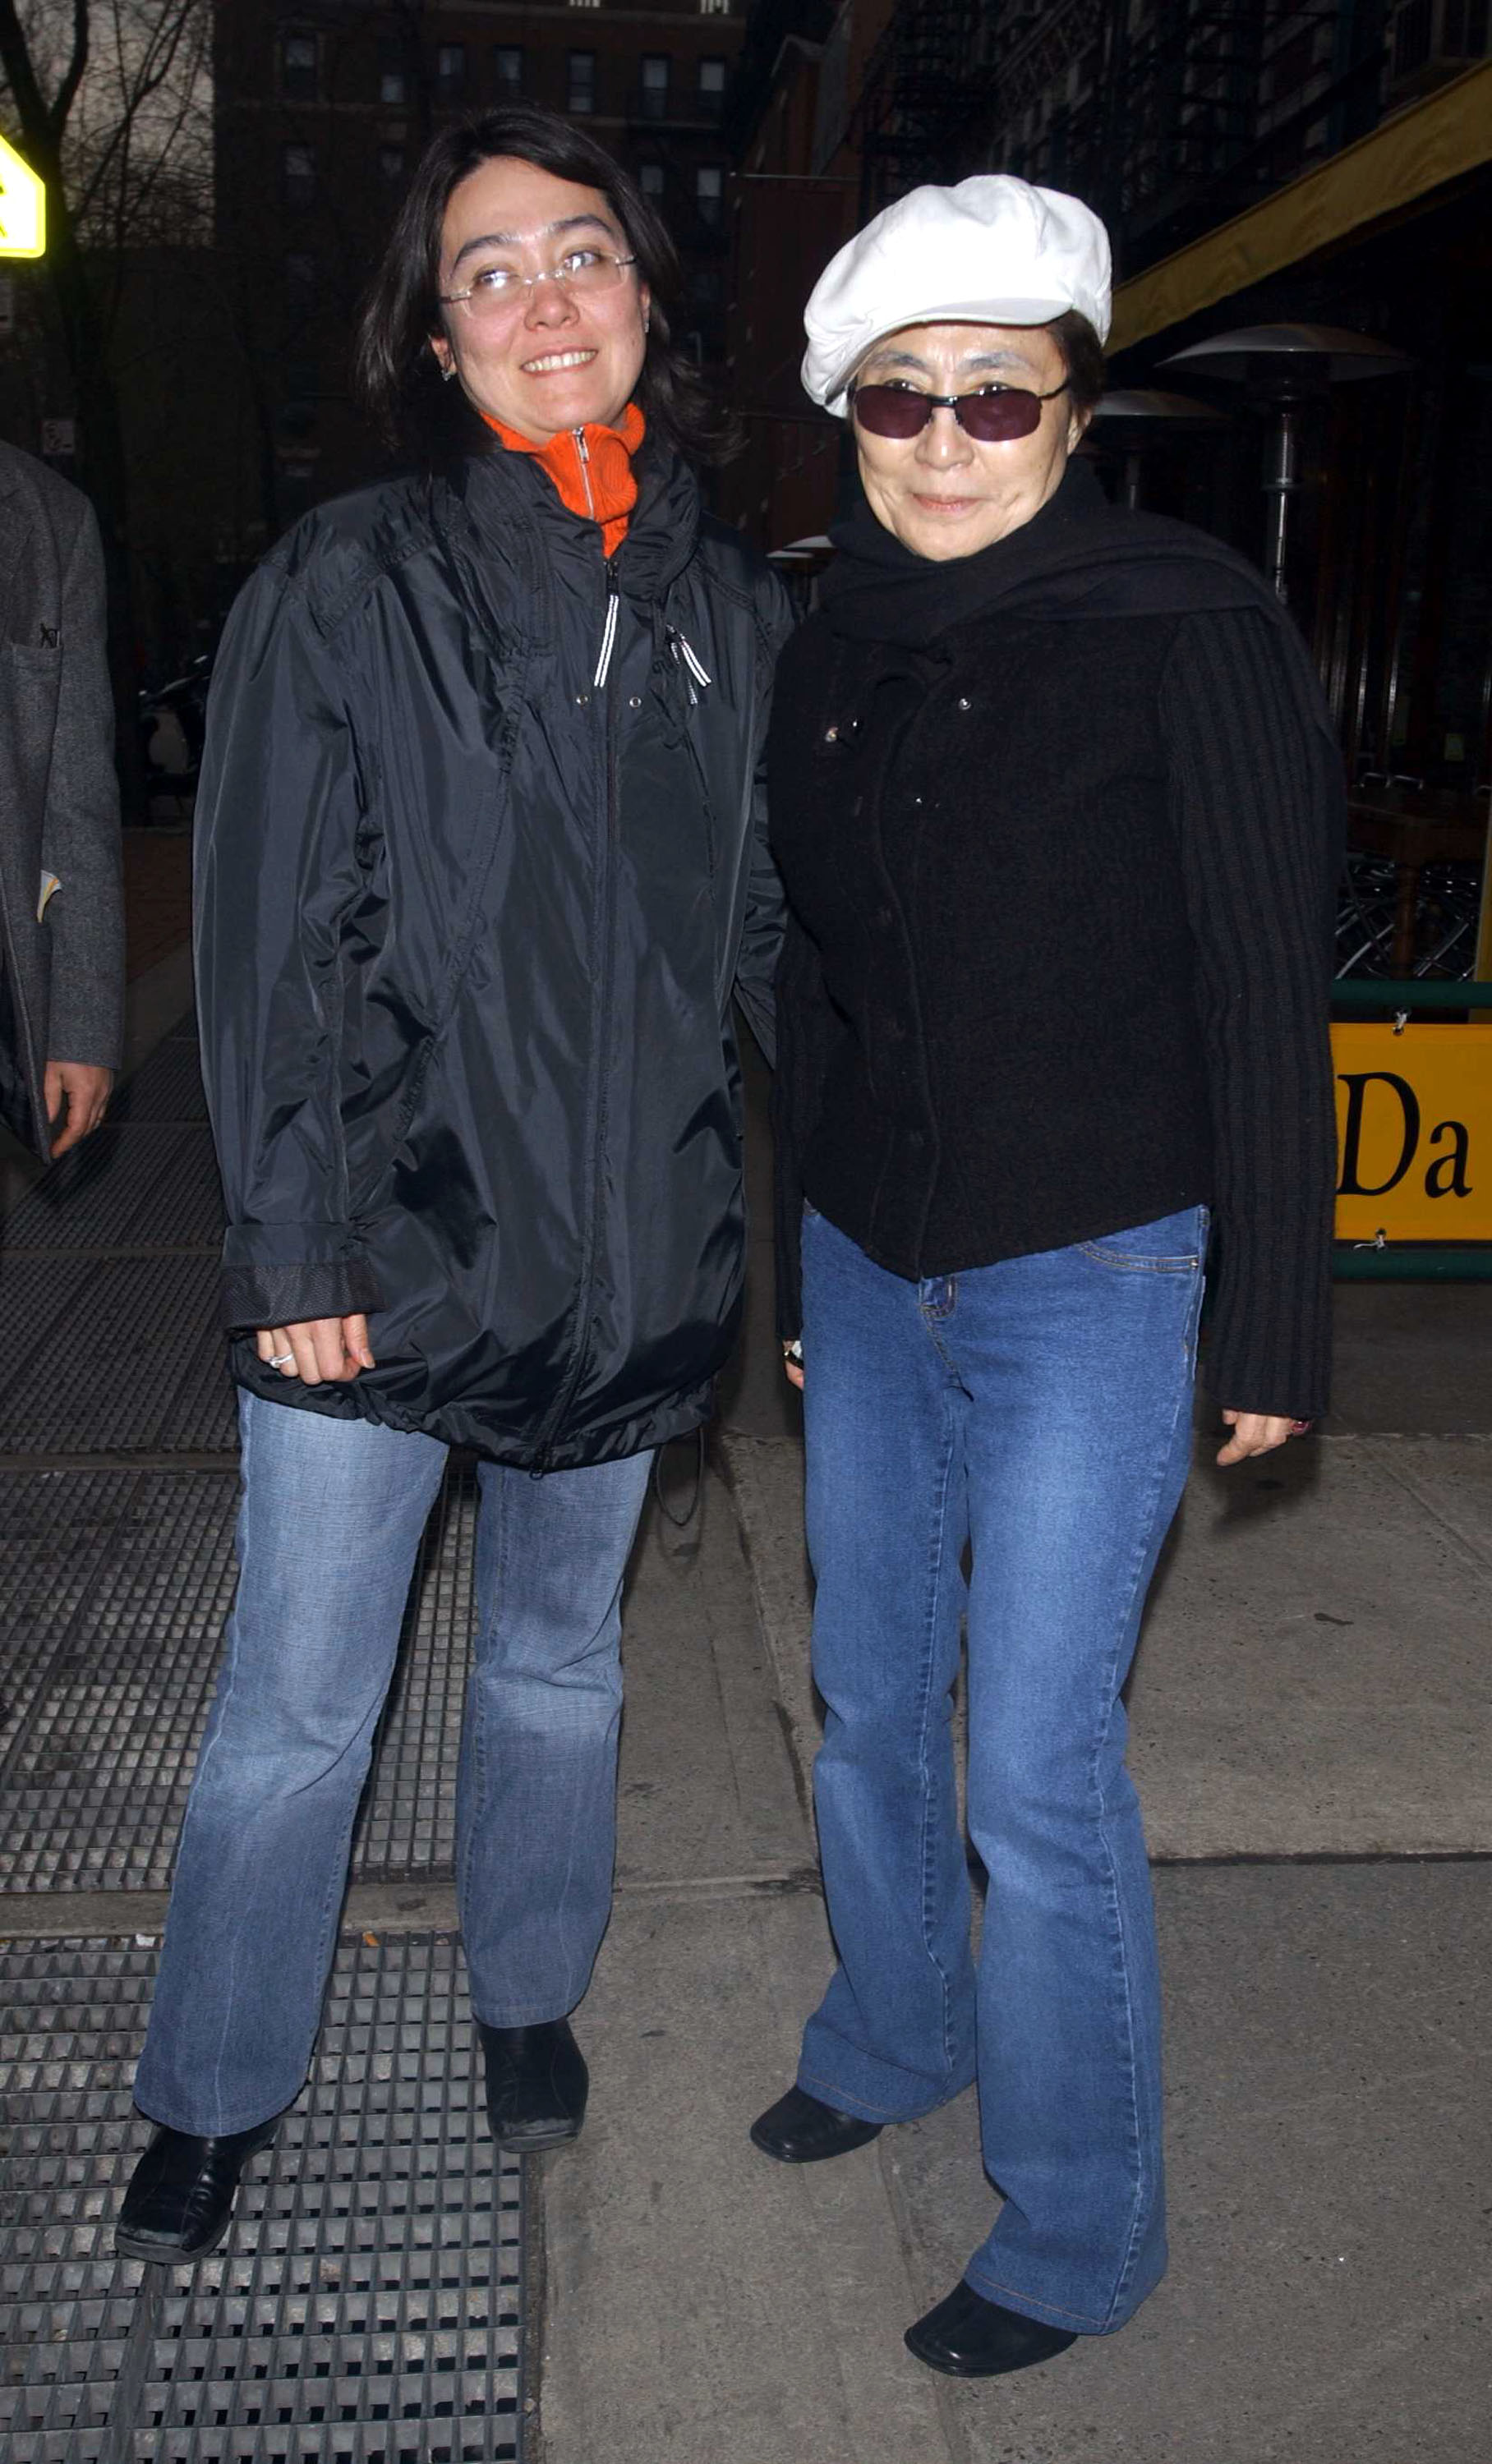 Kyoko Ono Cox and her mother Yoko Ono leave a restaurant March 20, 2004, in New York City. | Source: Getty Images